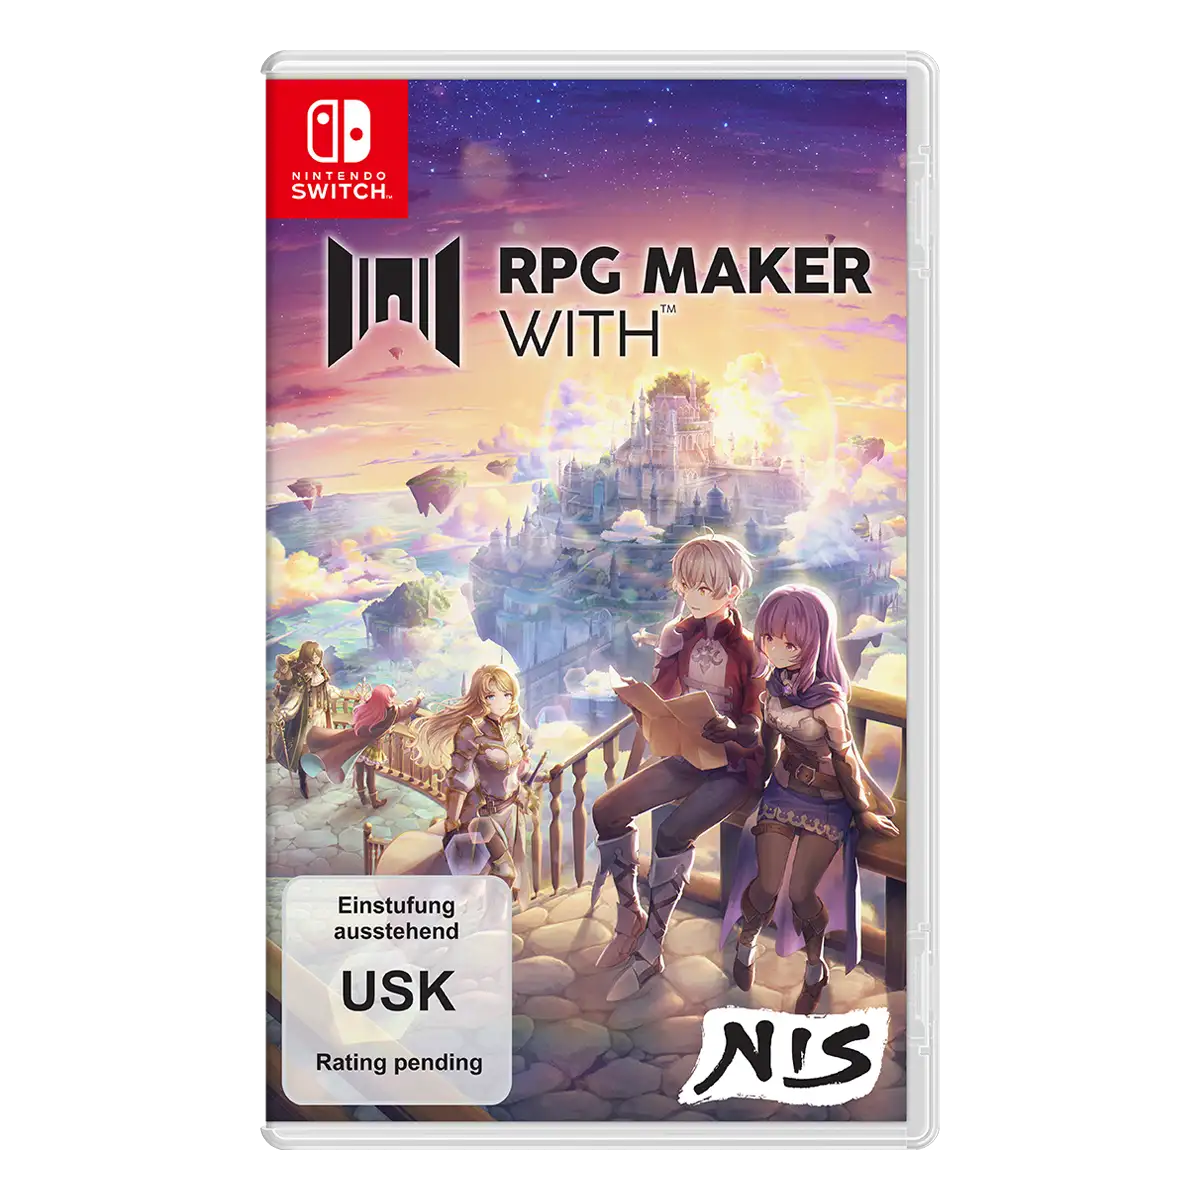 RPG MAKER WITH (Switch) Cover